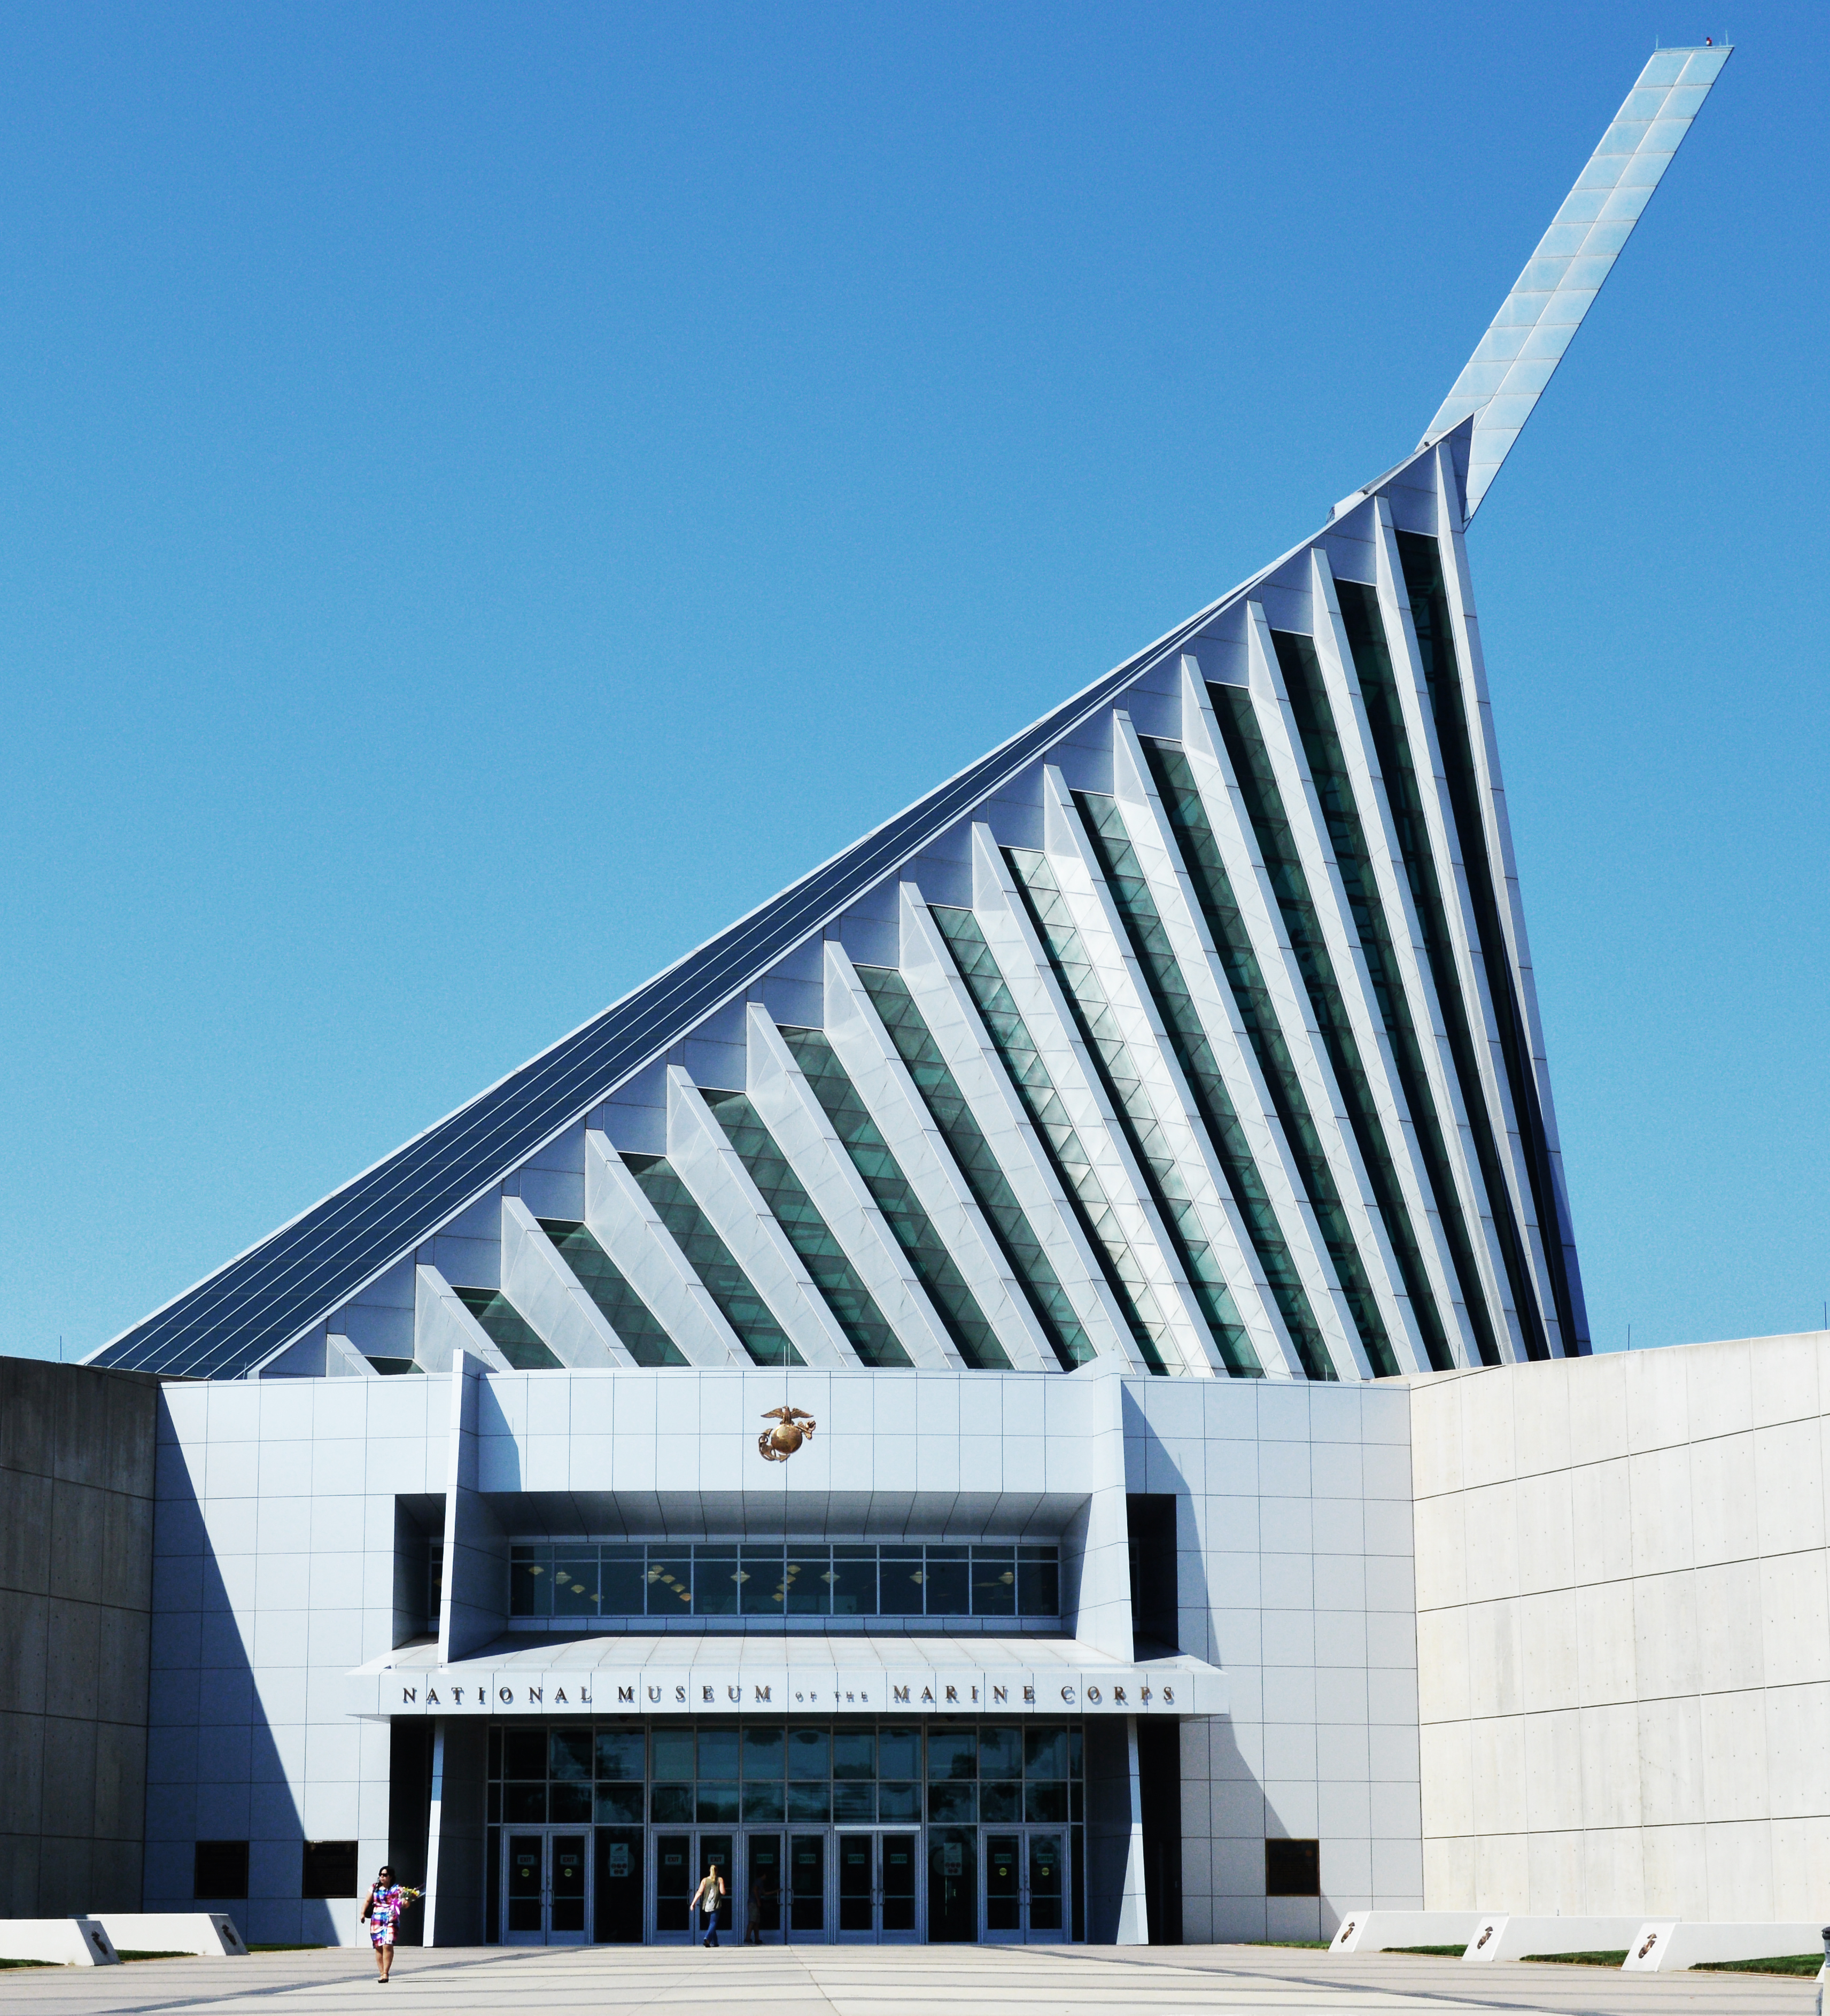 A white building with an off-center triangle roof